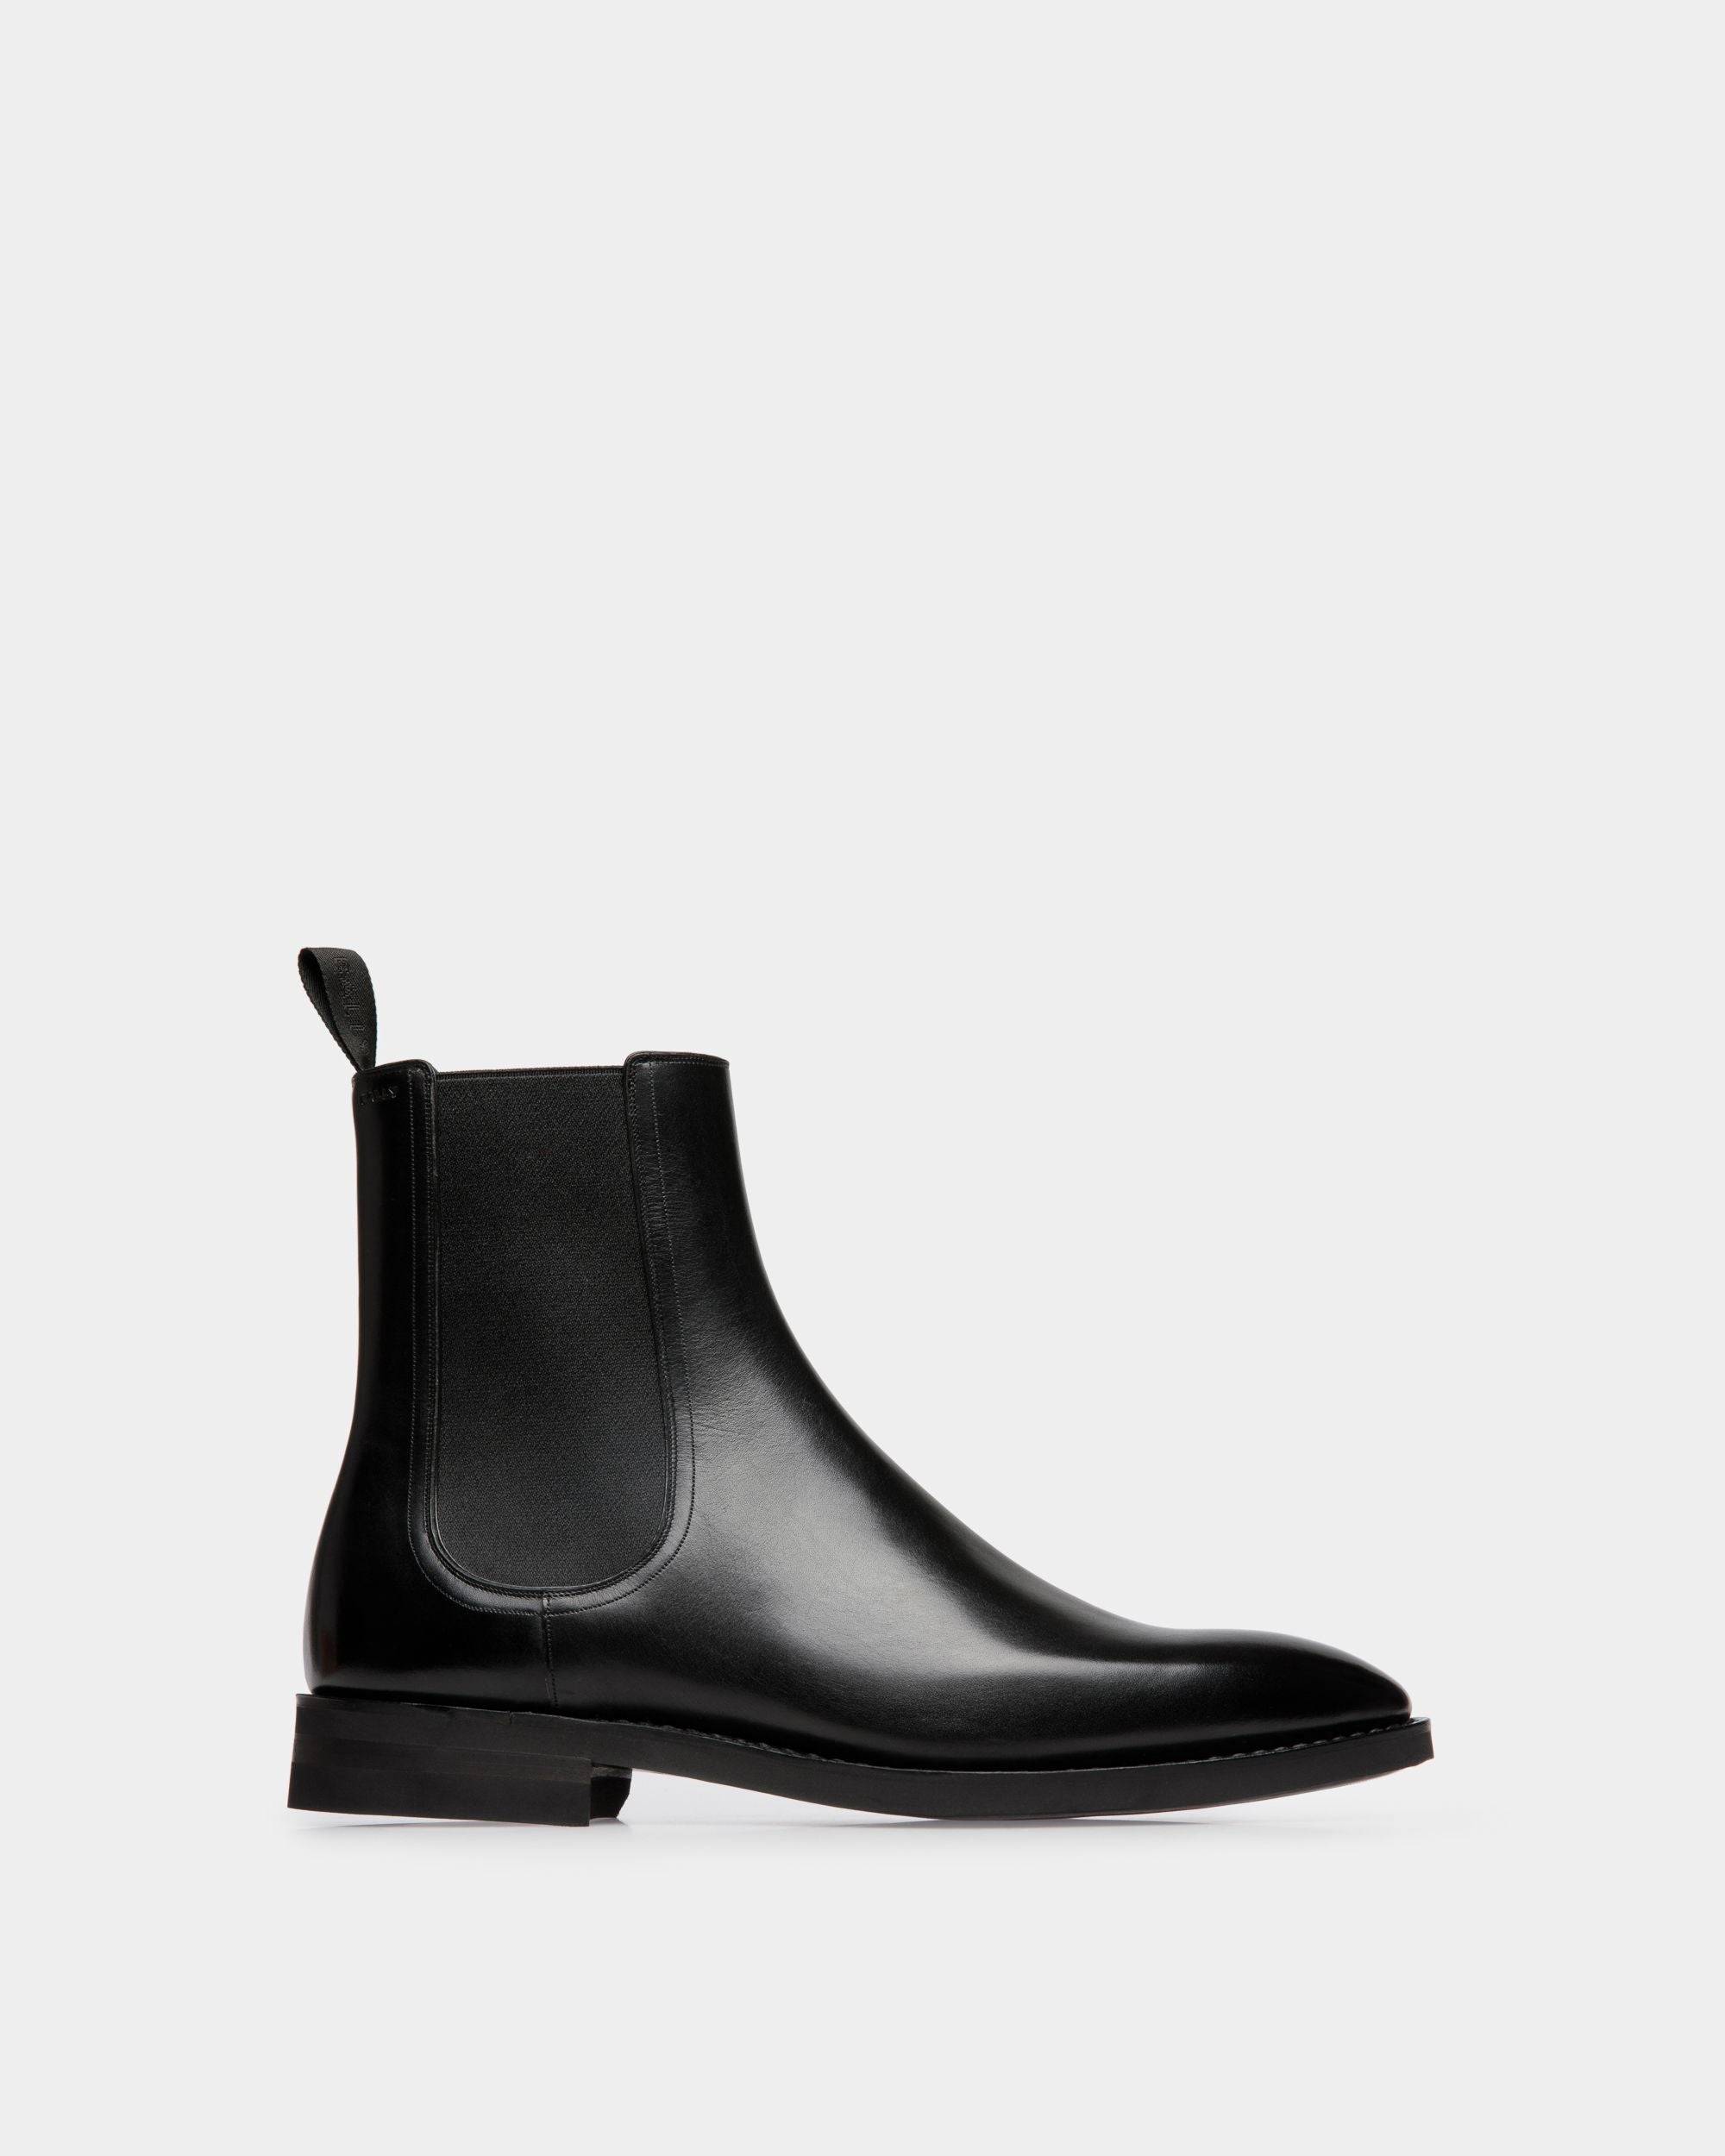 Men's Scribe Boot in Black Leather | Bally | Still Life Side